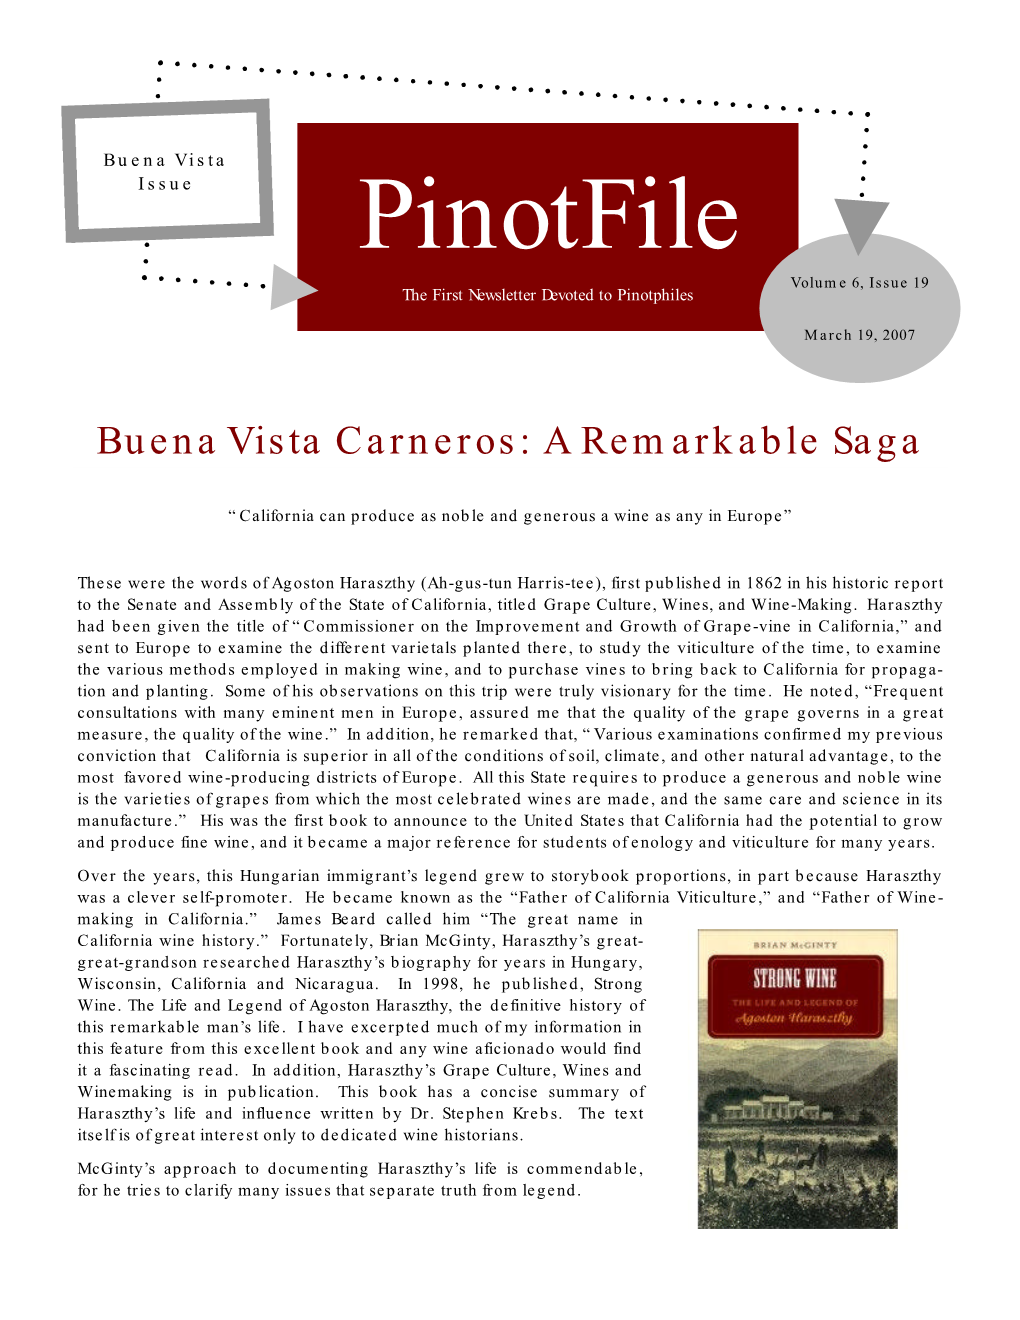 Pinotfile Vol 6, Issue 19